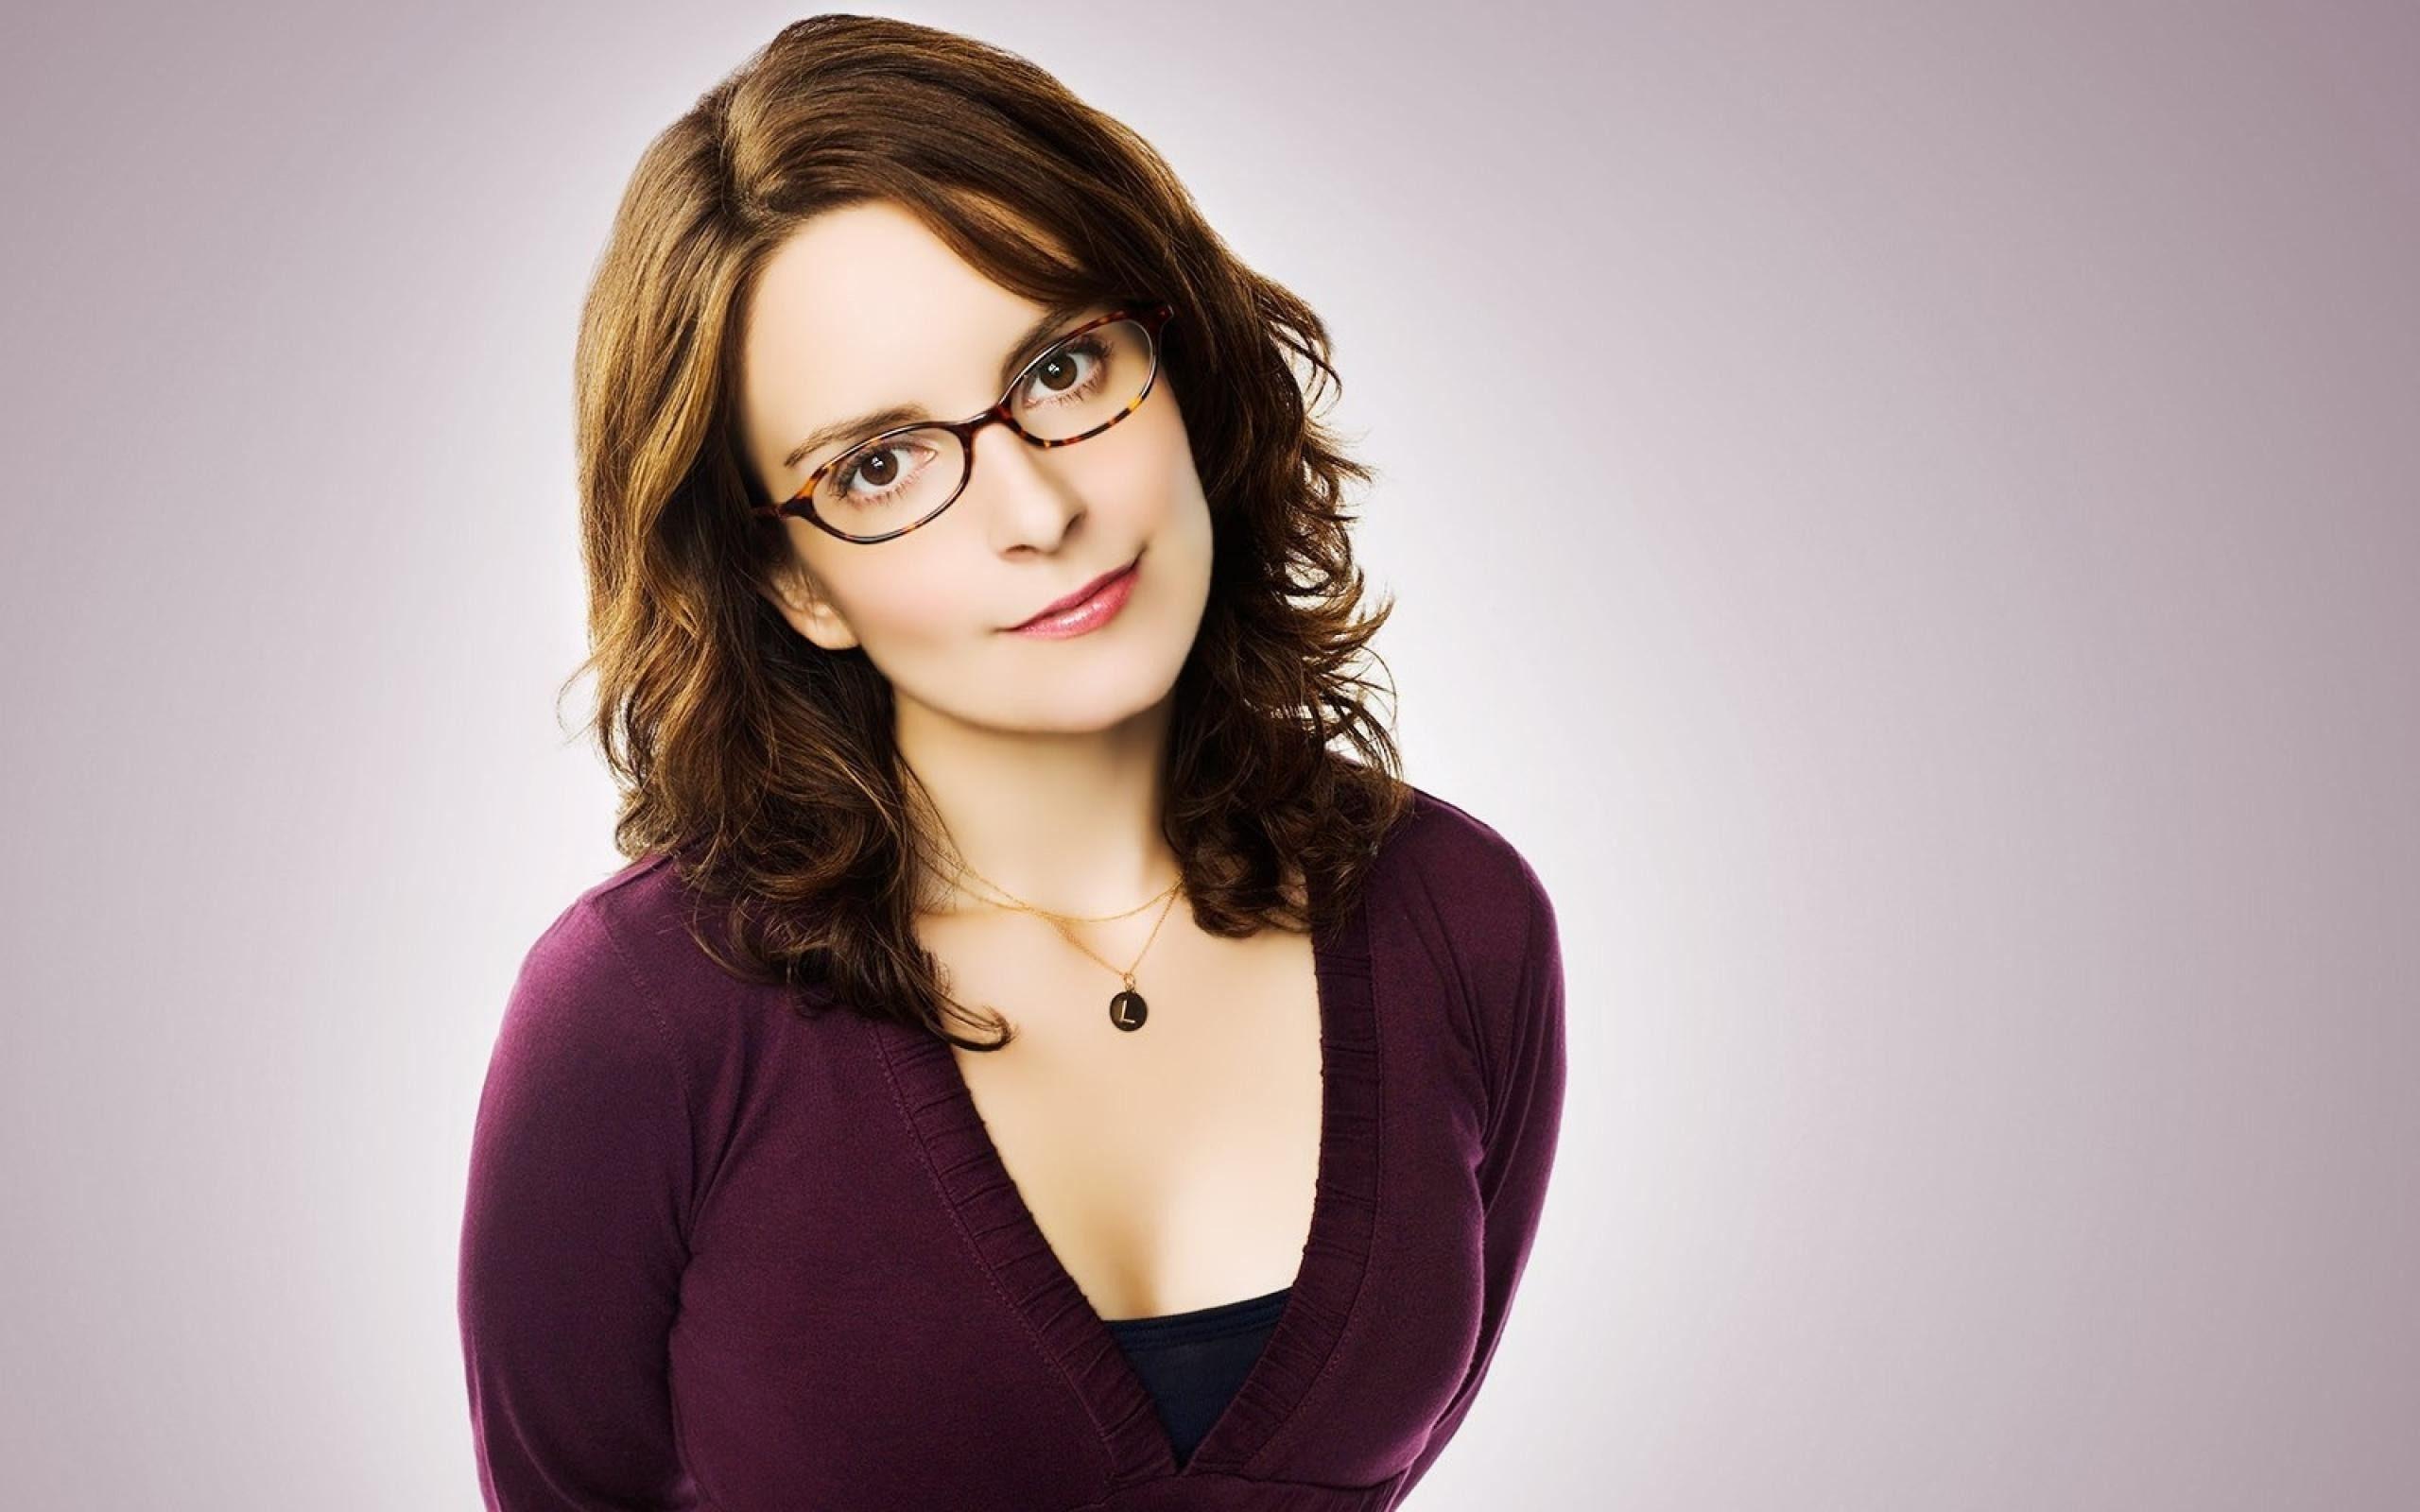 Tina fey with glasses